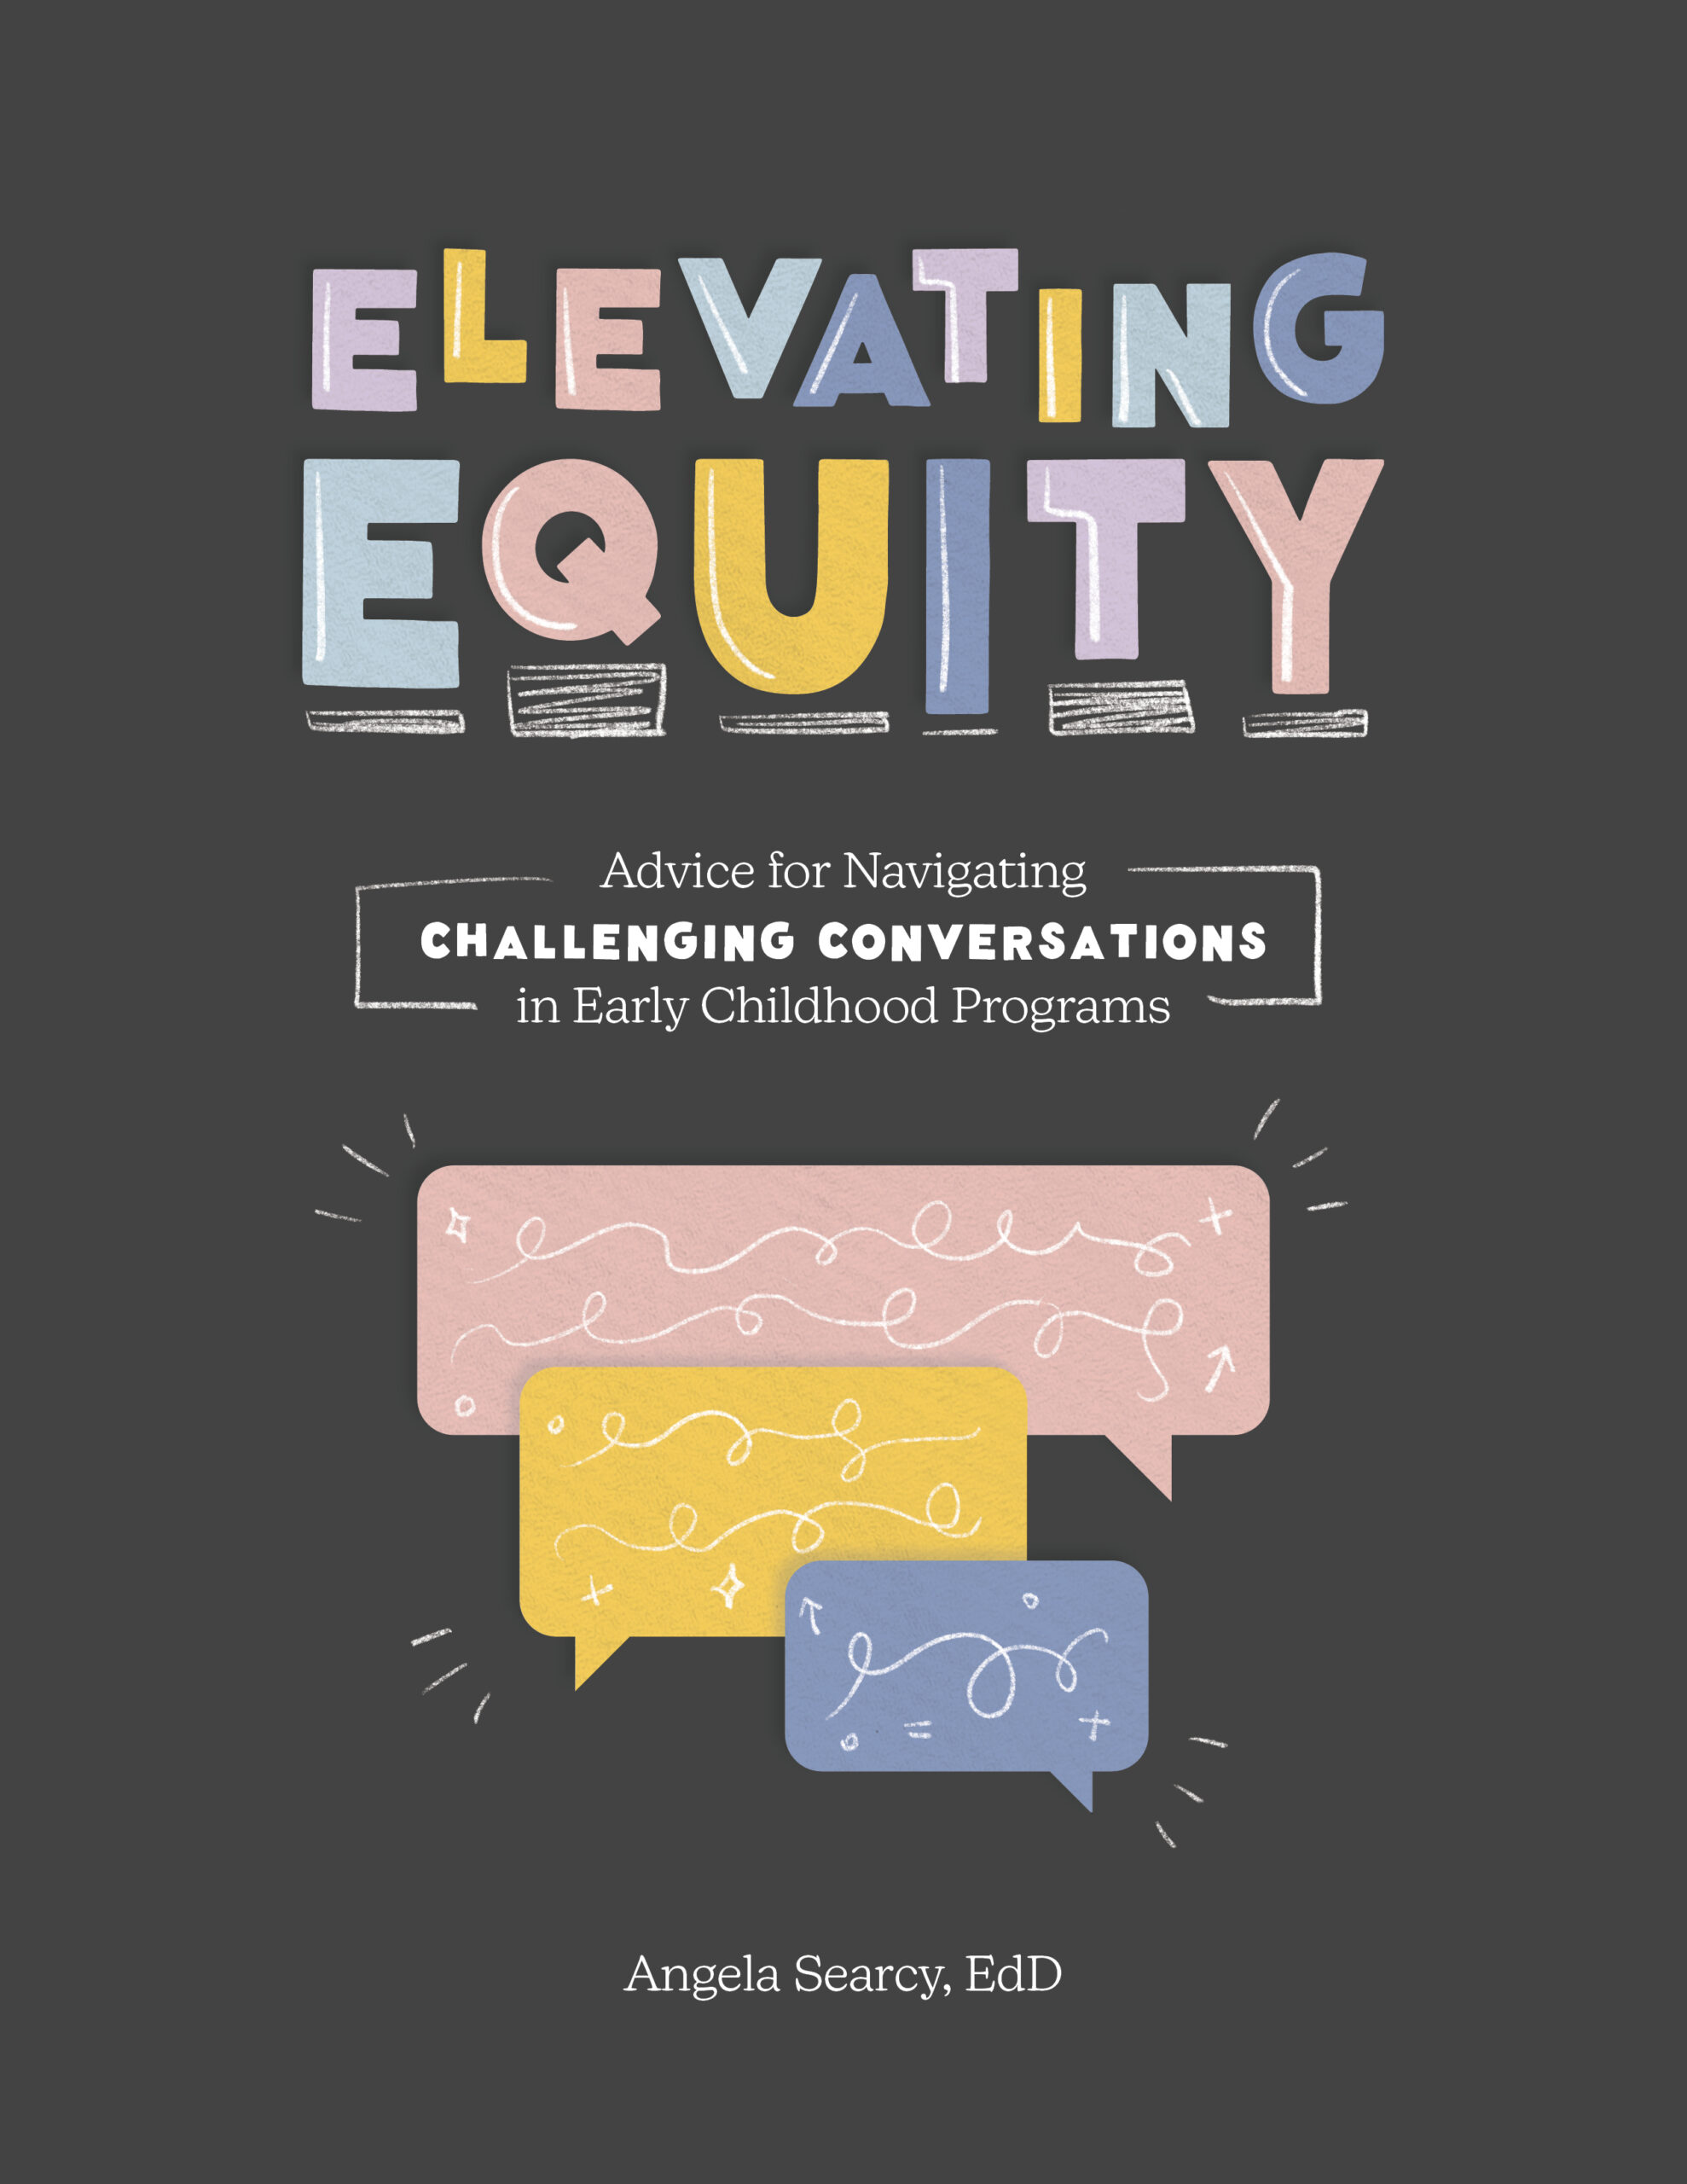 Advice for Navigating Challenging Conversations in Early Childhood Programs